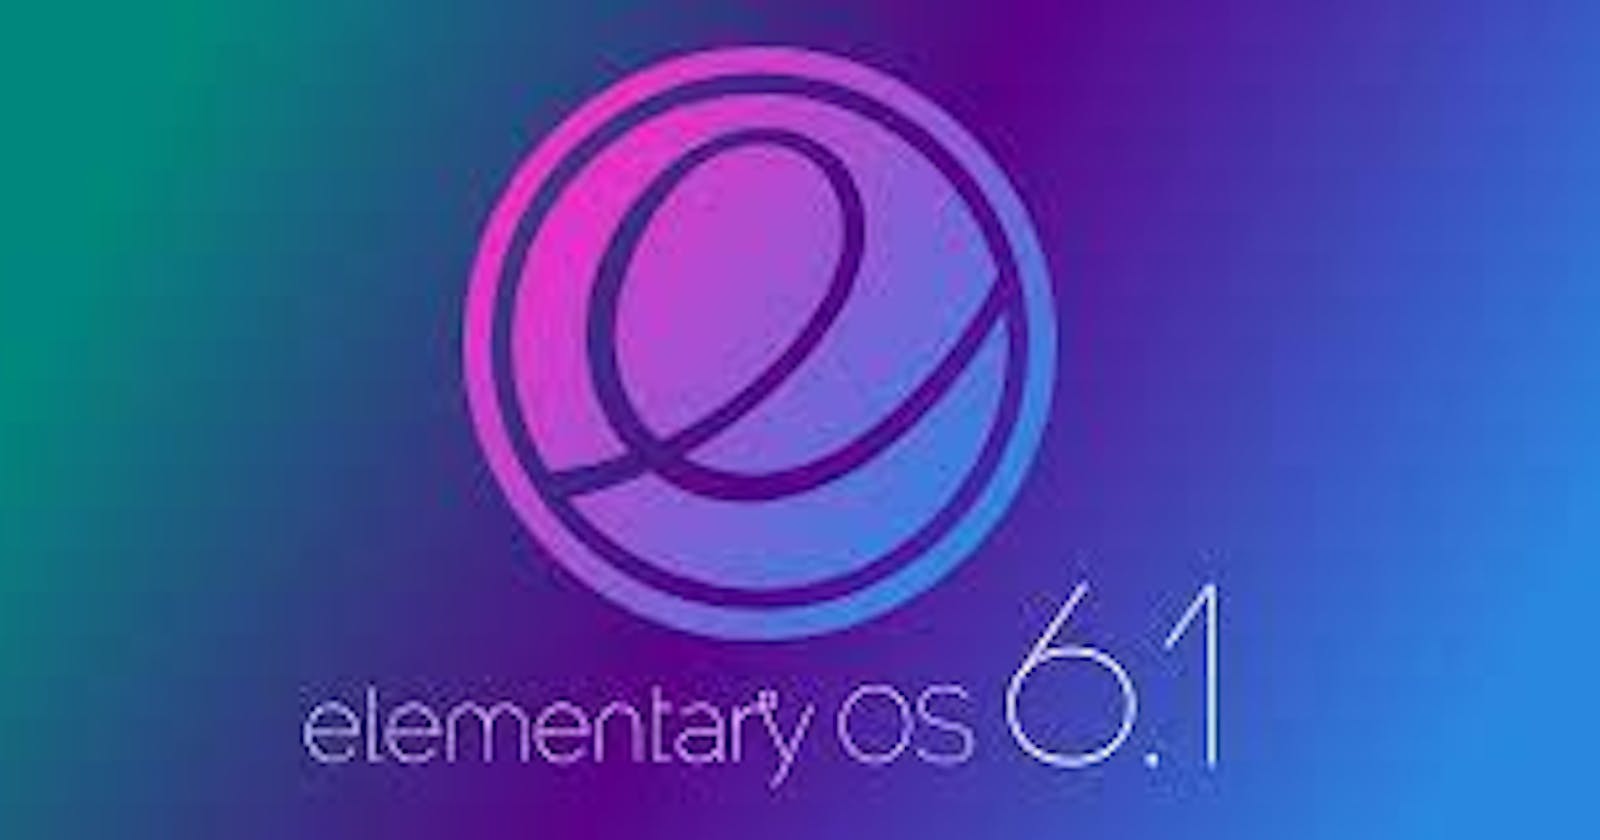 How to add environment variable assignments on Elementary OS 6.1 via the terminal emulator and the bash shell?